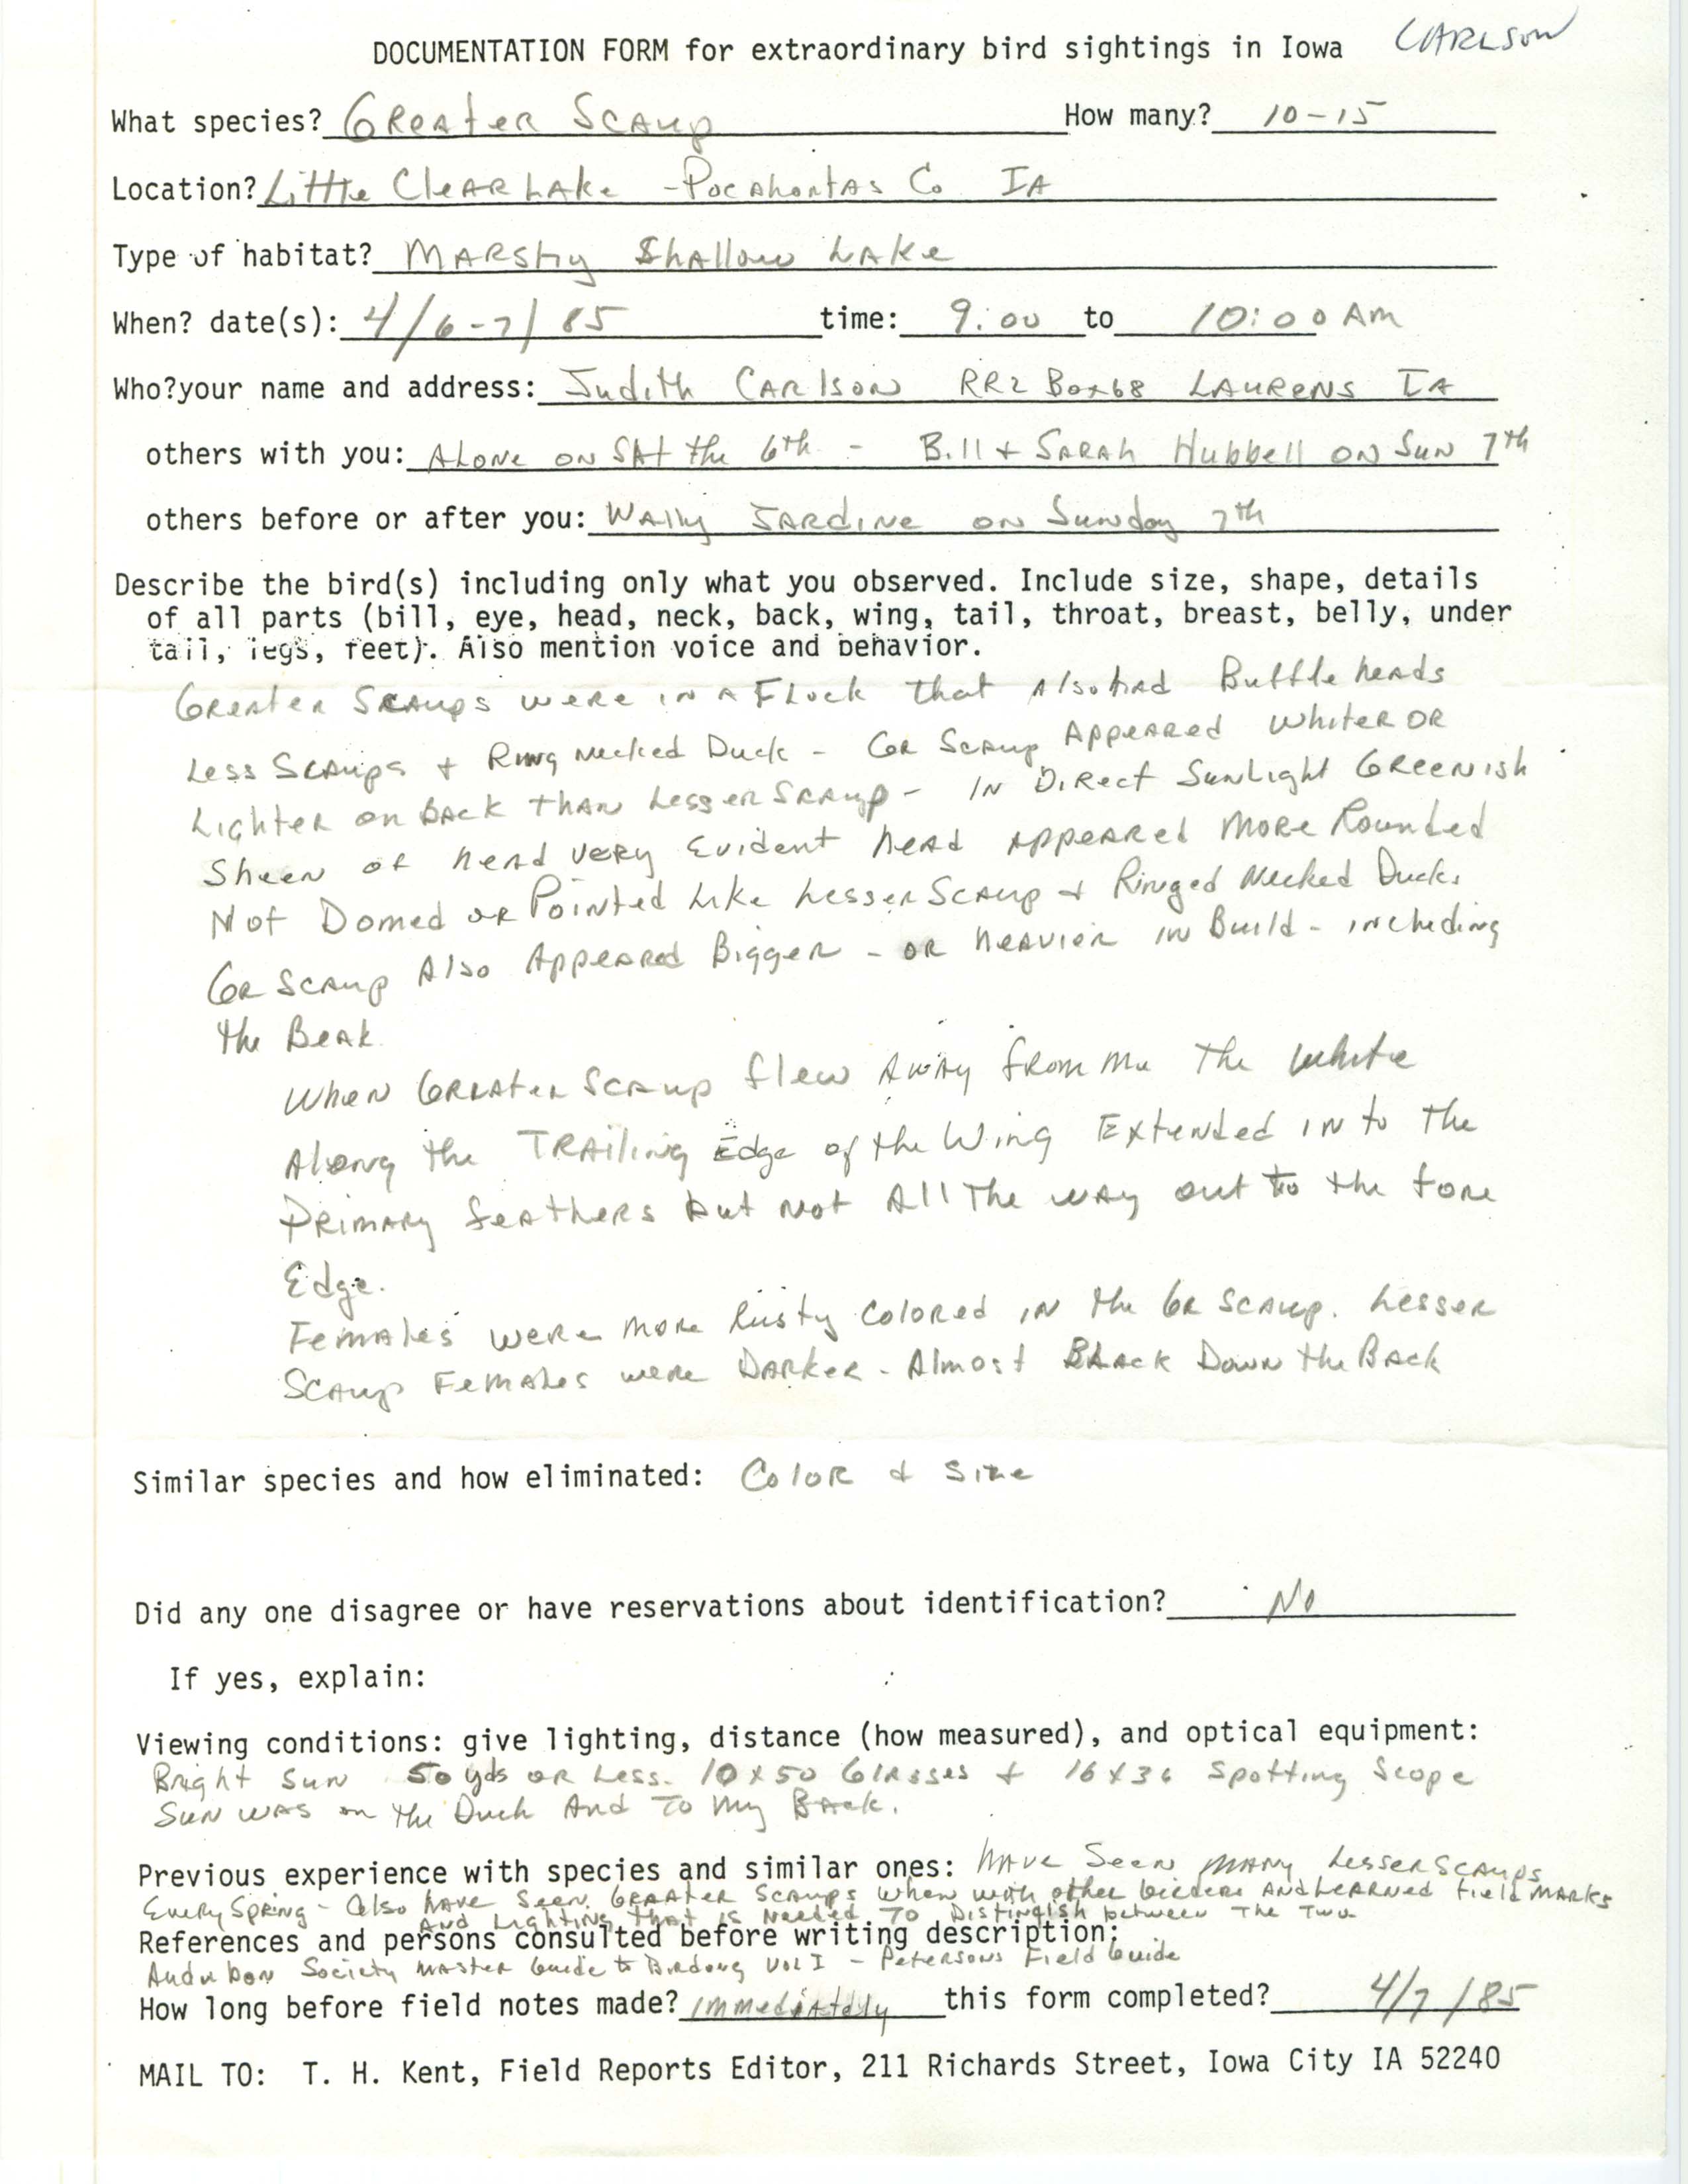 Rare bird documentation form for Greater Scaup at Little Clear Lake in 1985